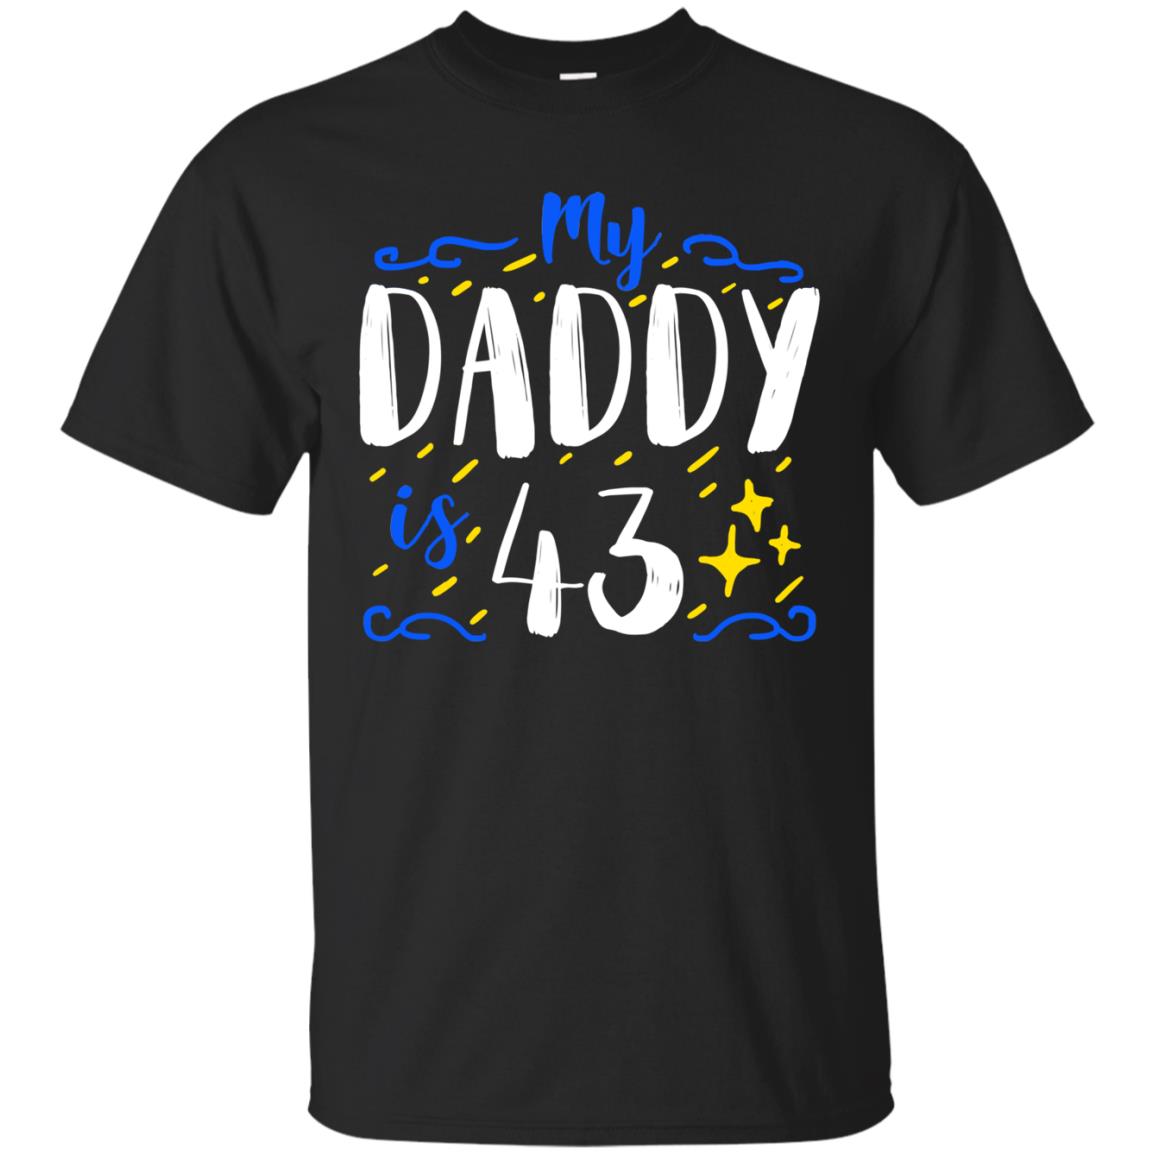 My Daddy Is 43 43rd Birthday Daddy Shirt For Sons Or DaughtersG200 Gildan Ultra Cotton T-Shirt